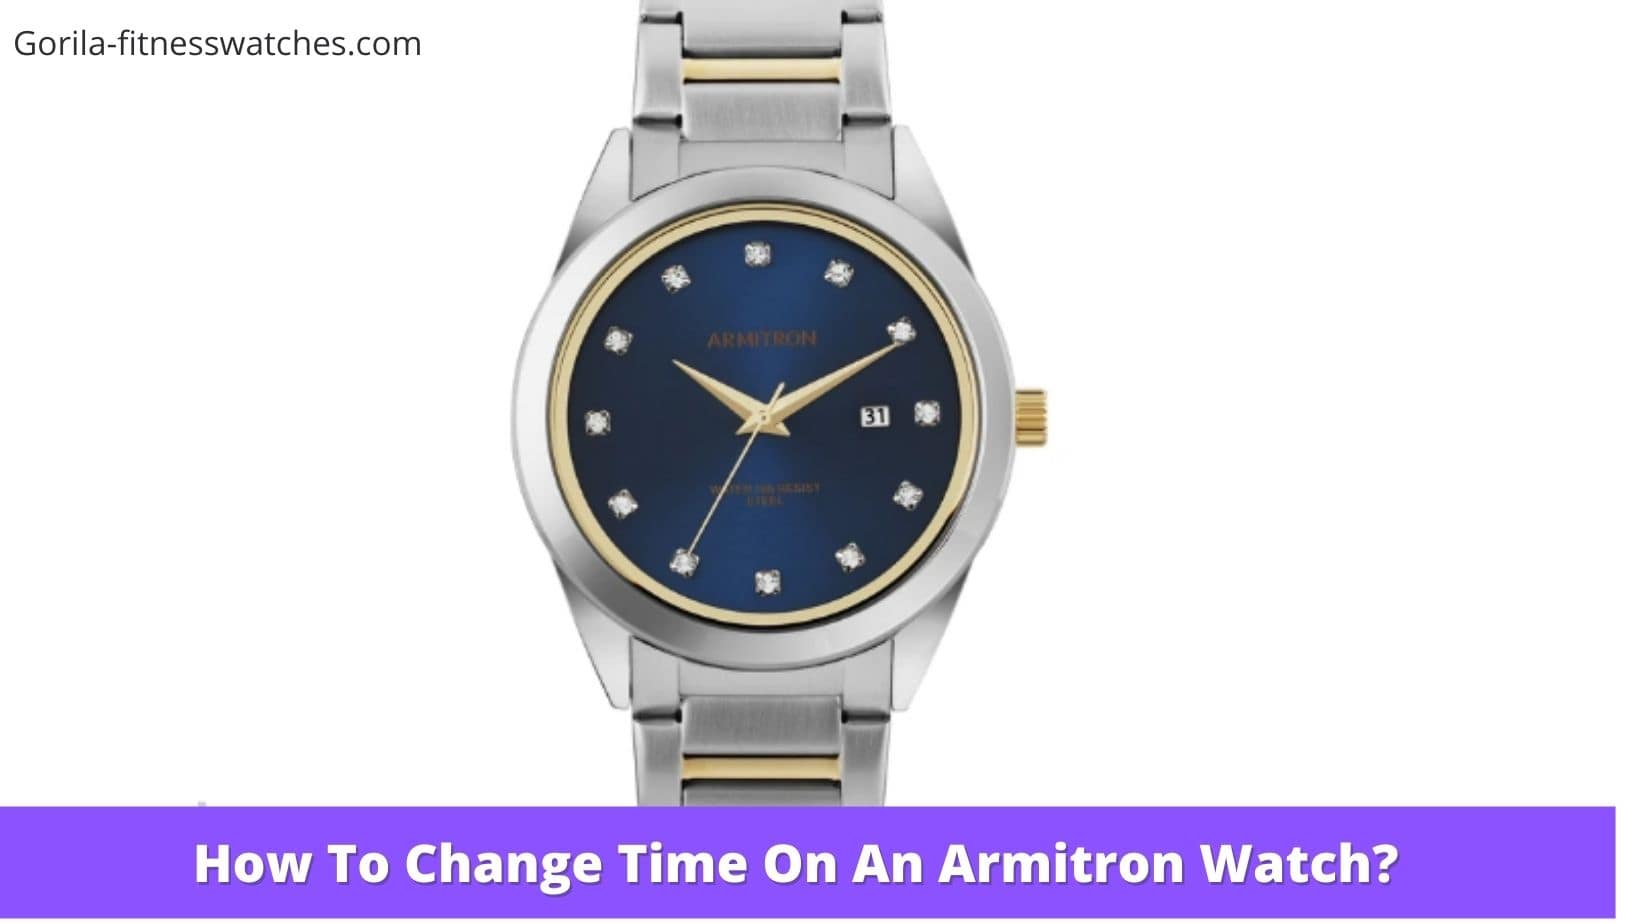 How To Change Time On An Armitron Watch?